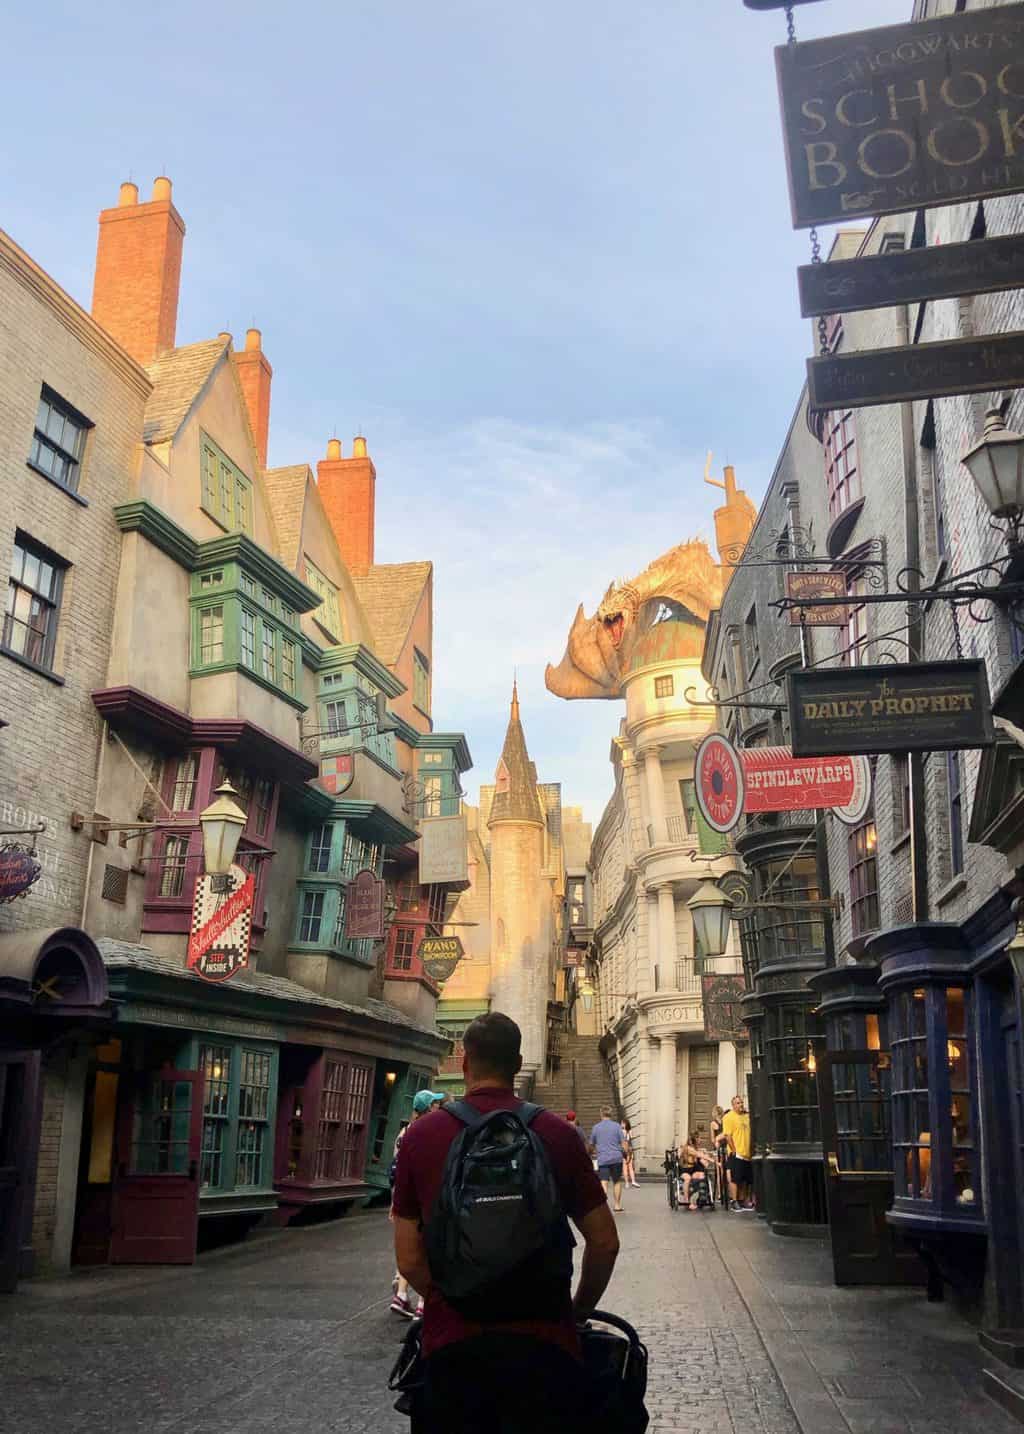 first time at universal studios orlando